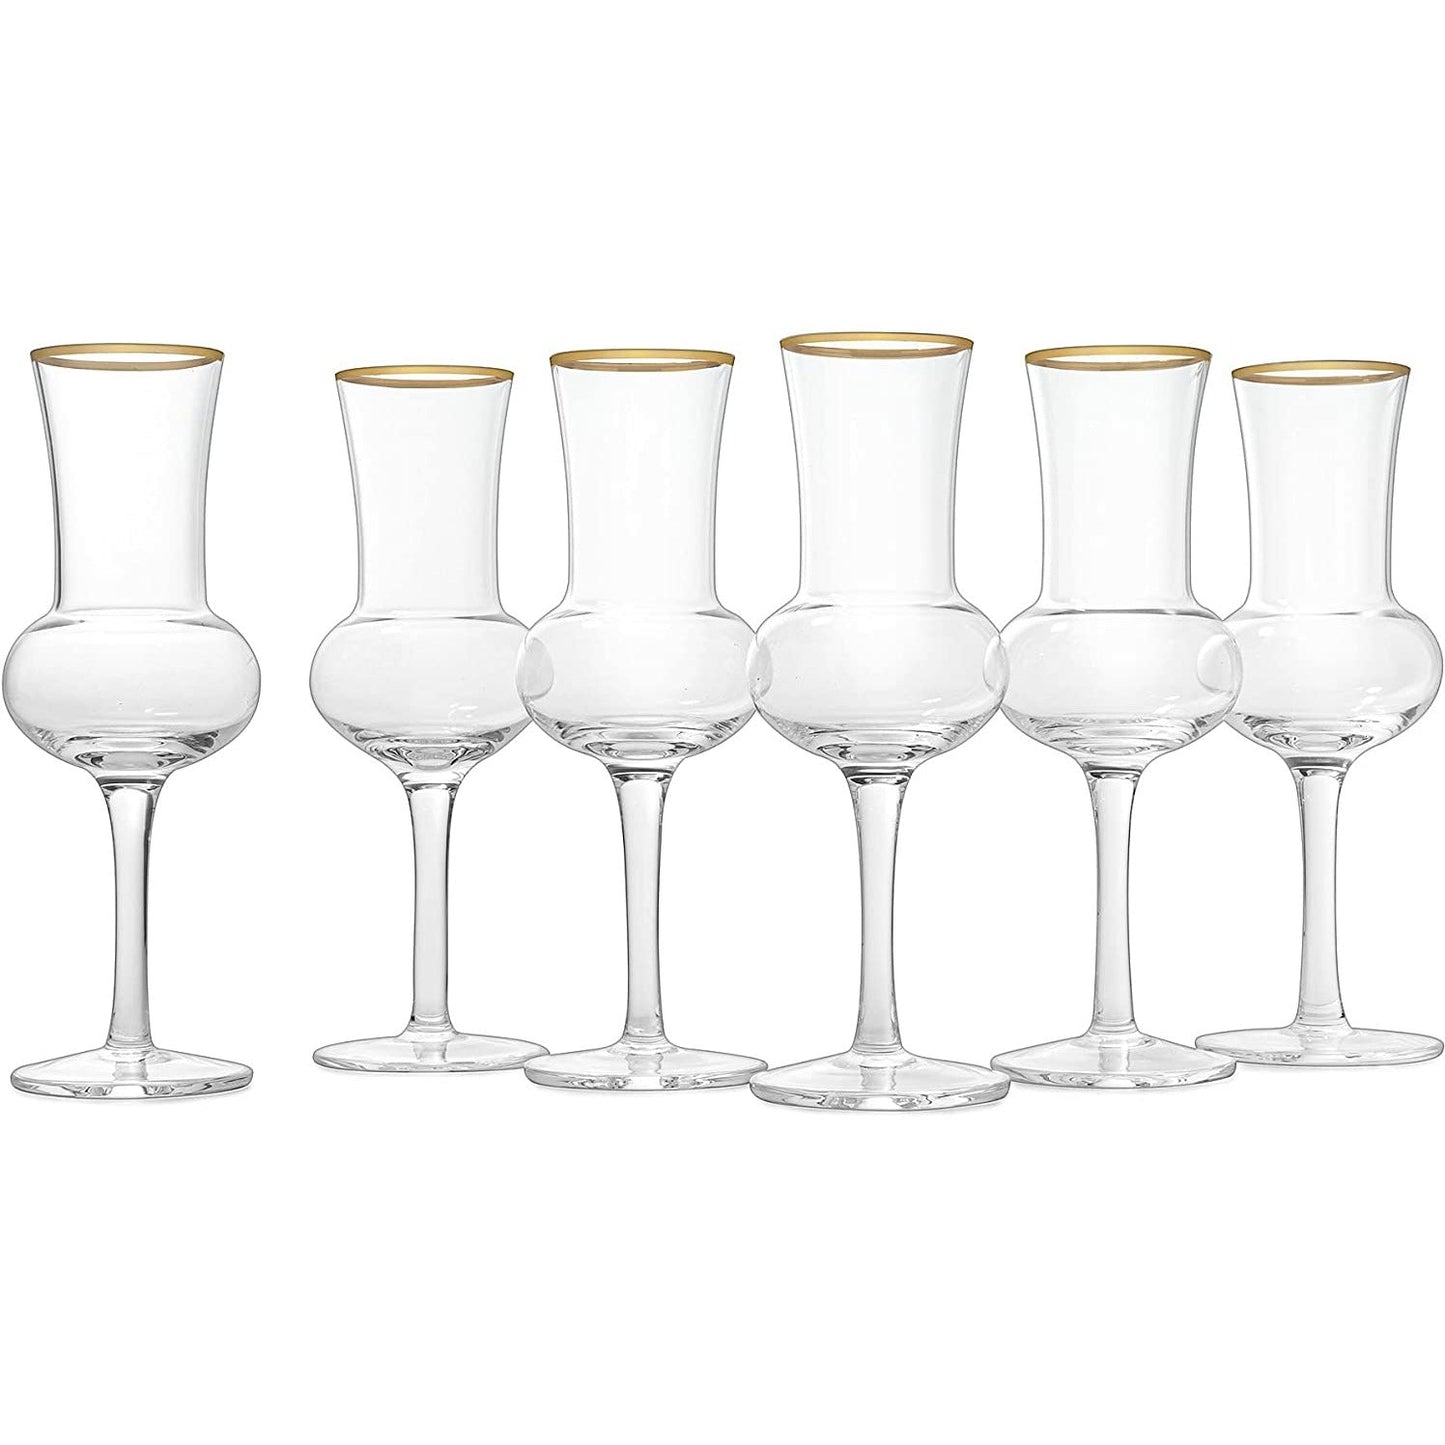 Specialty Grappa Glassware, Set of 6